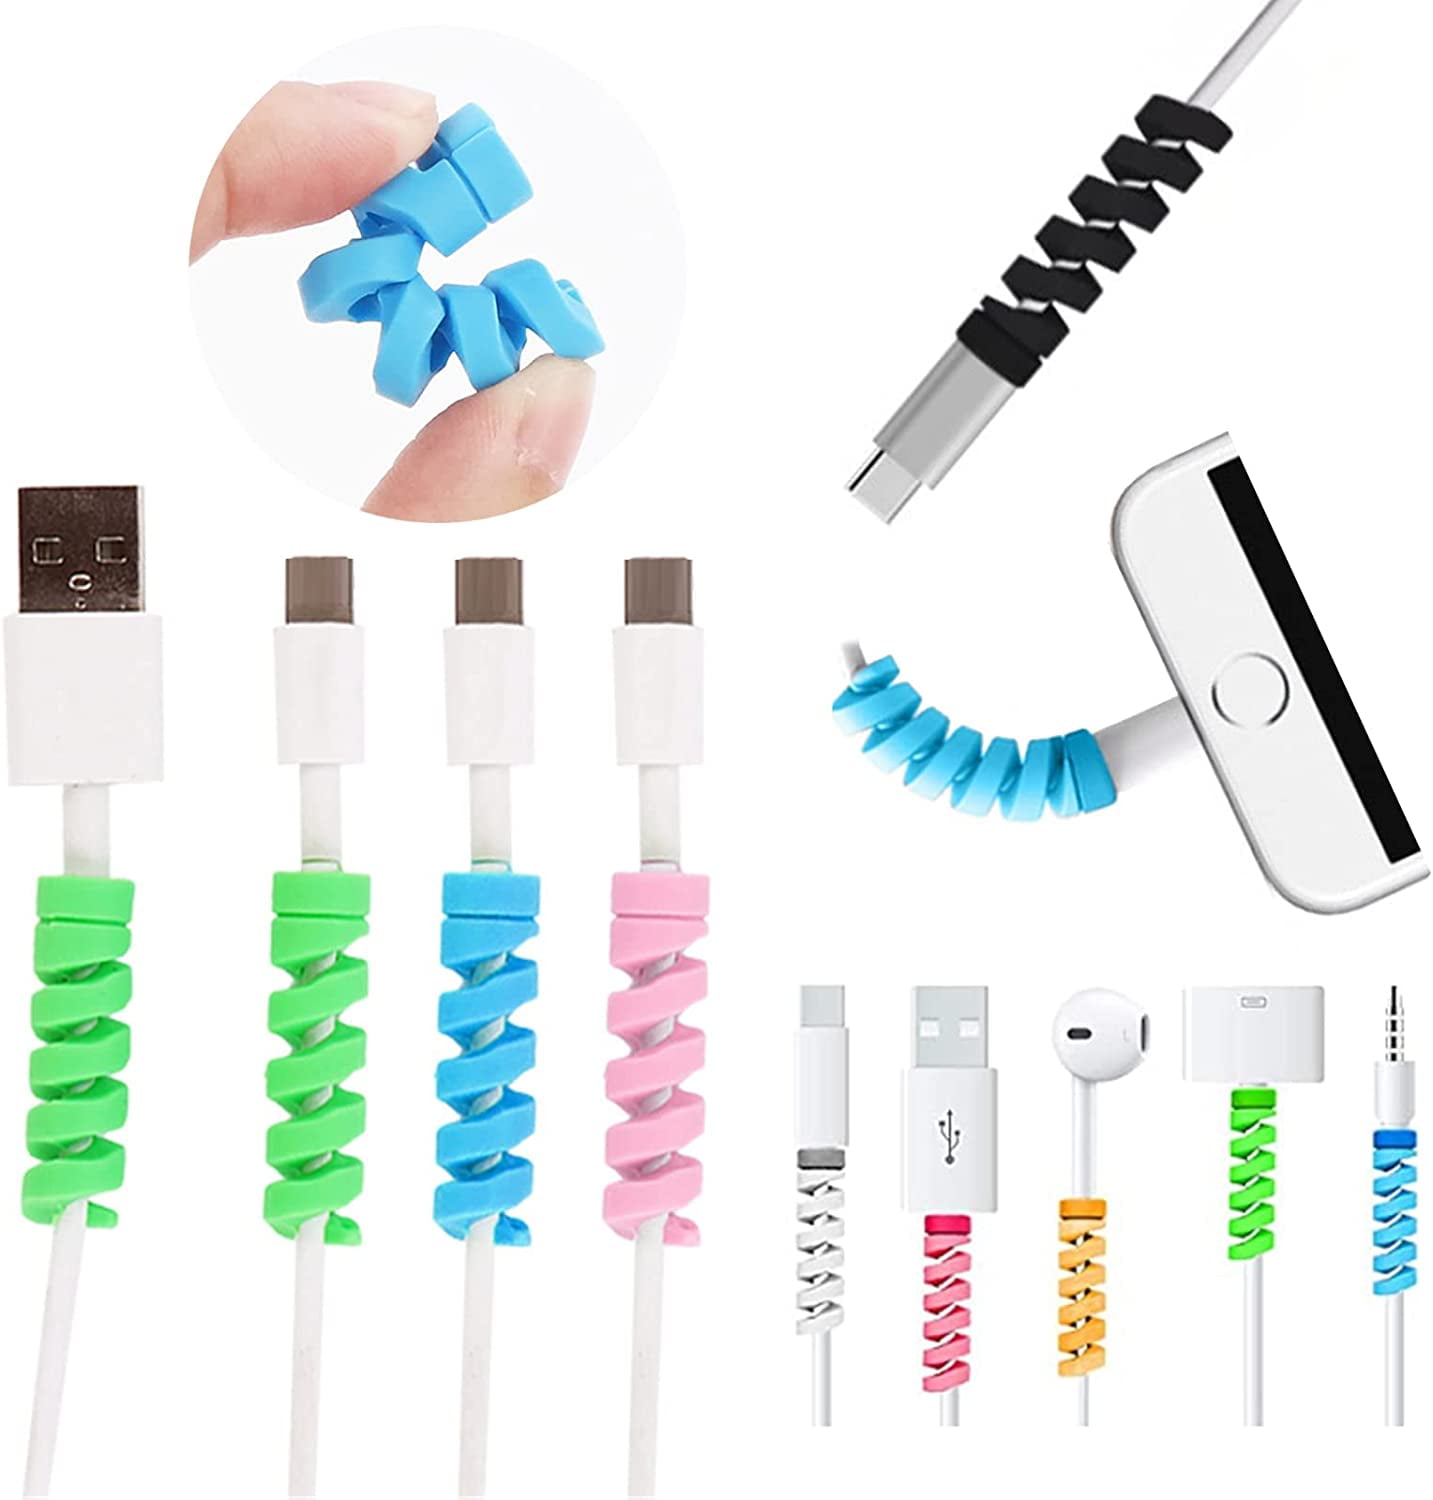 8 Pcs Charger Cable Protectors for End Cord Savers, Spiral USB Wire  Protector for i Pad iOS Android Phone Headphone Laptop Earphone,Silicone  Cable Wrap Accessories 